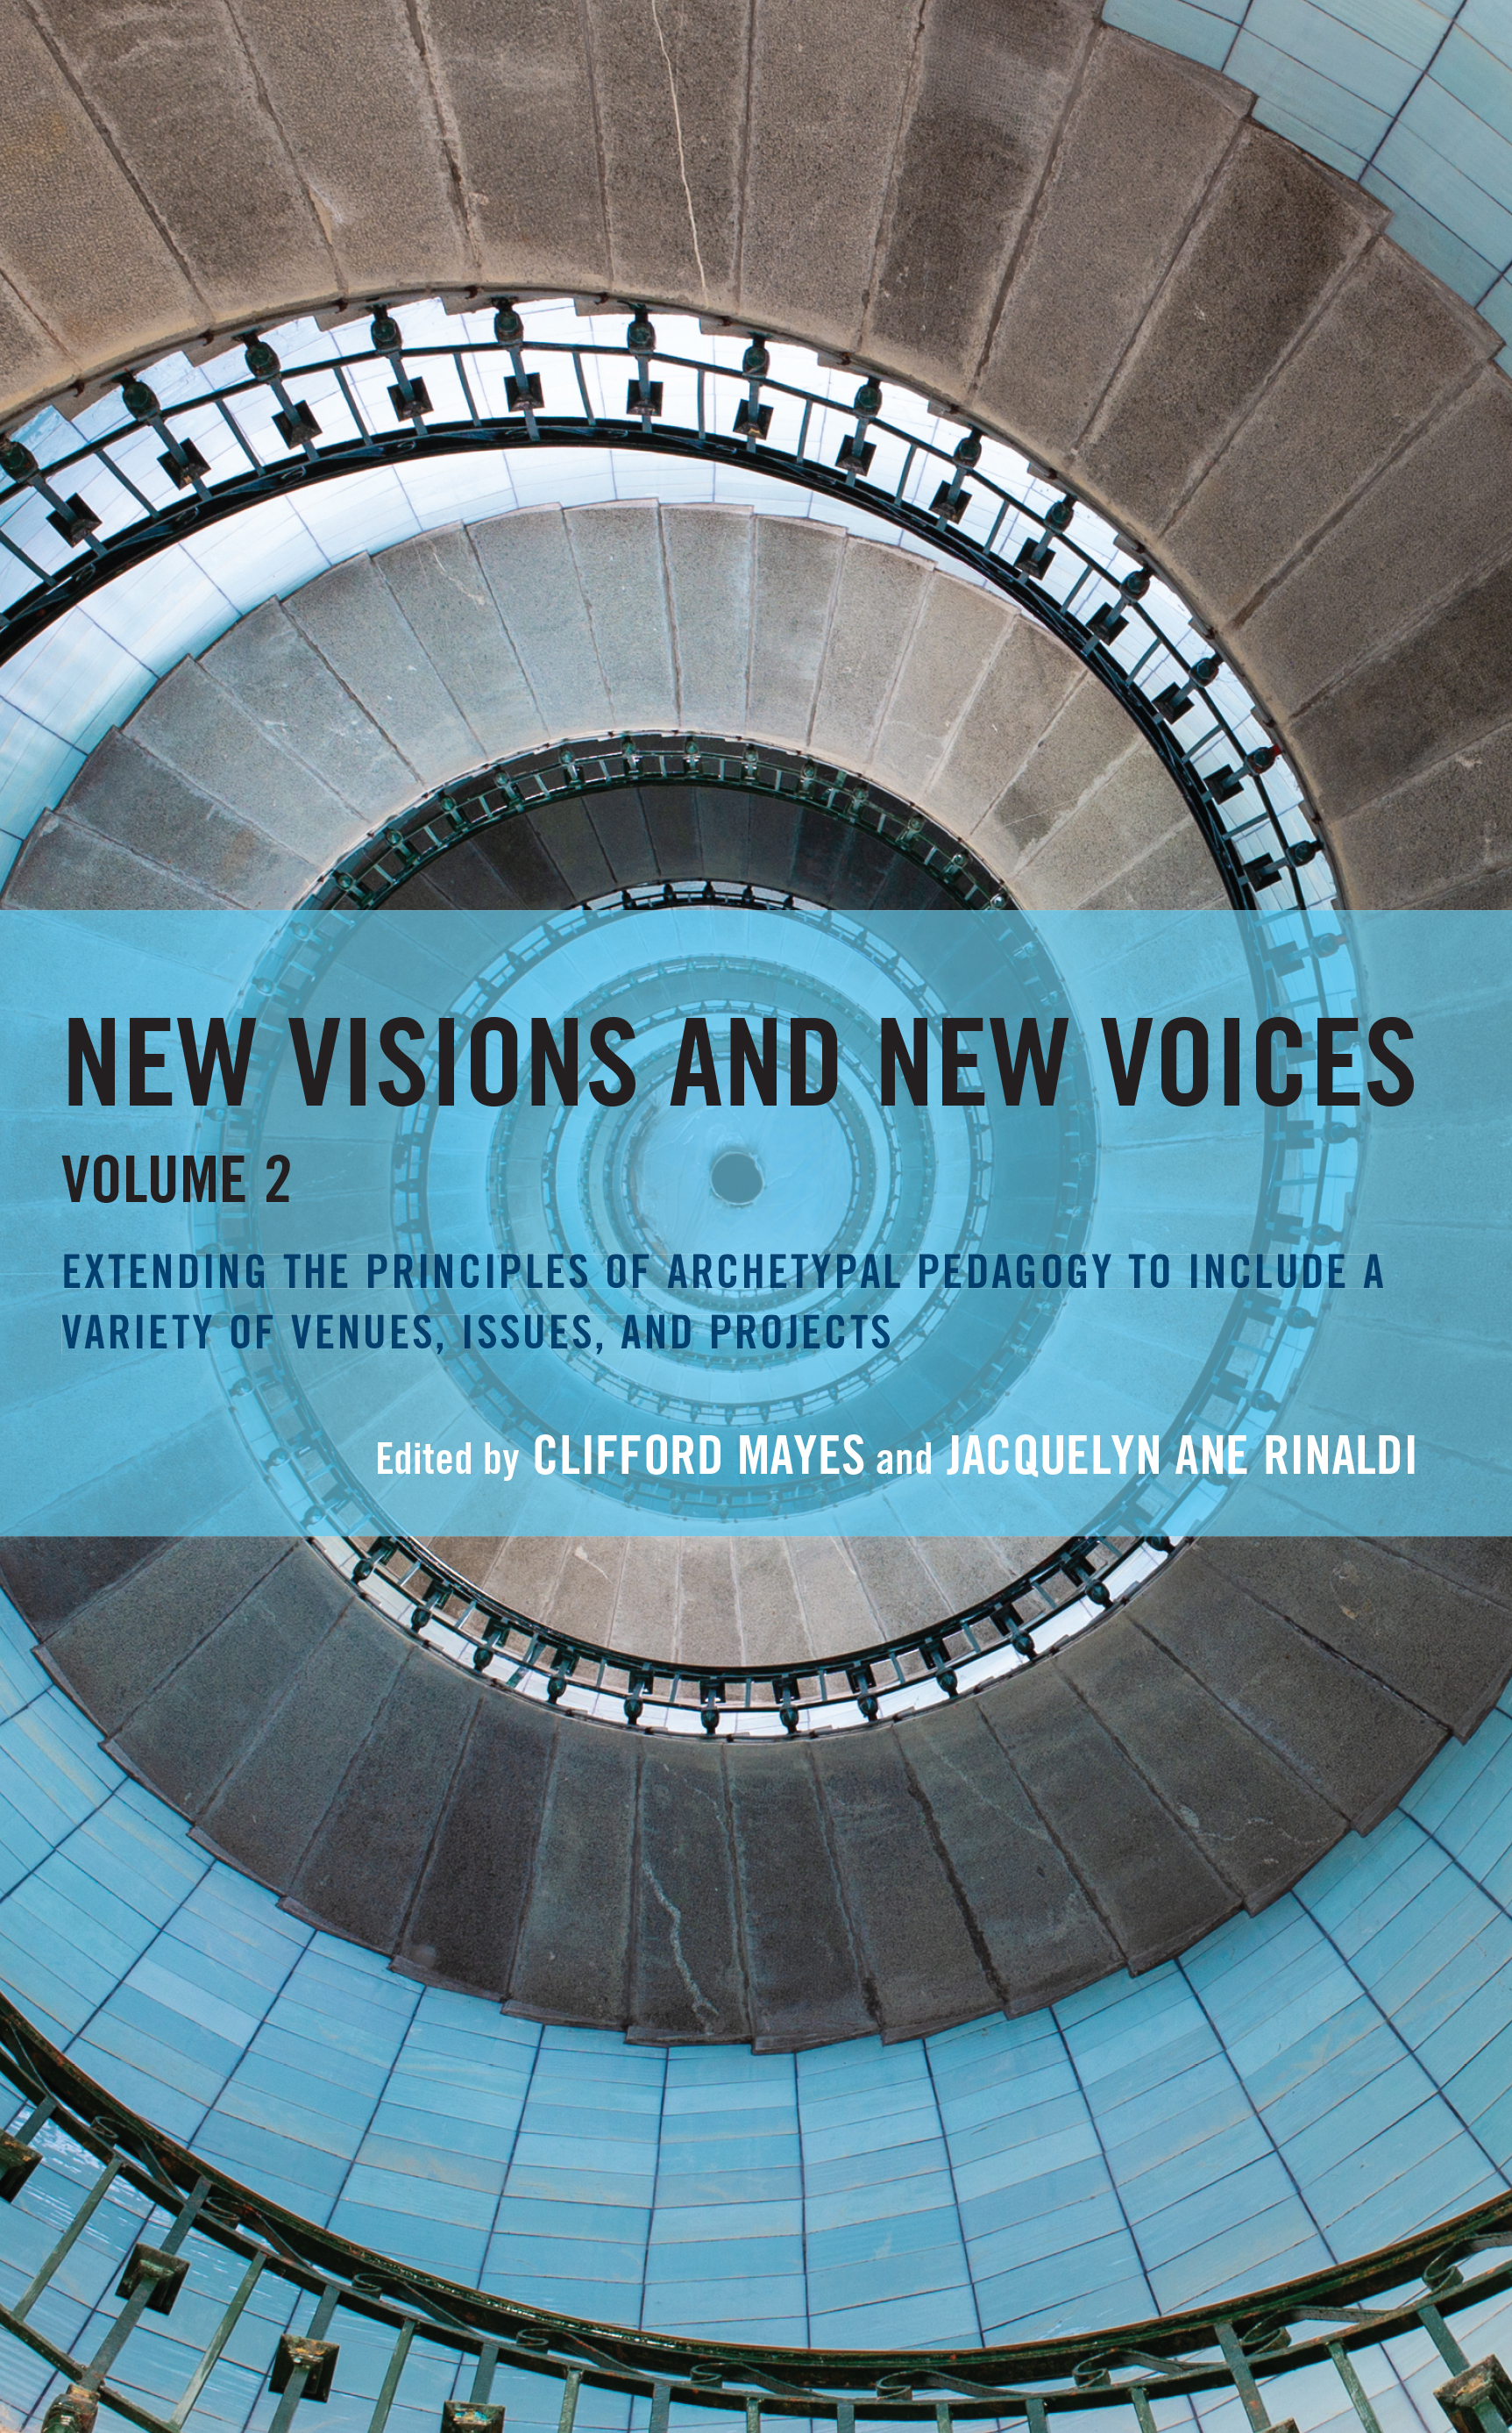 New Visions and New Voices: Extending the Principles of Archetypal Pedagogy to Include a Variety of Venues, Issues, and Projects